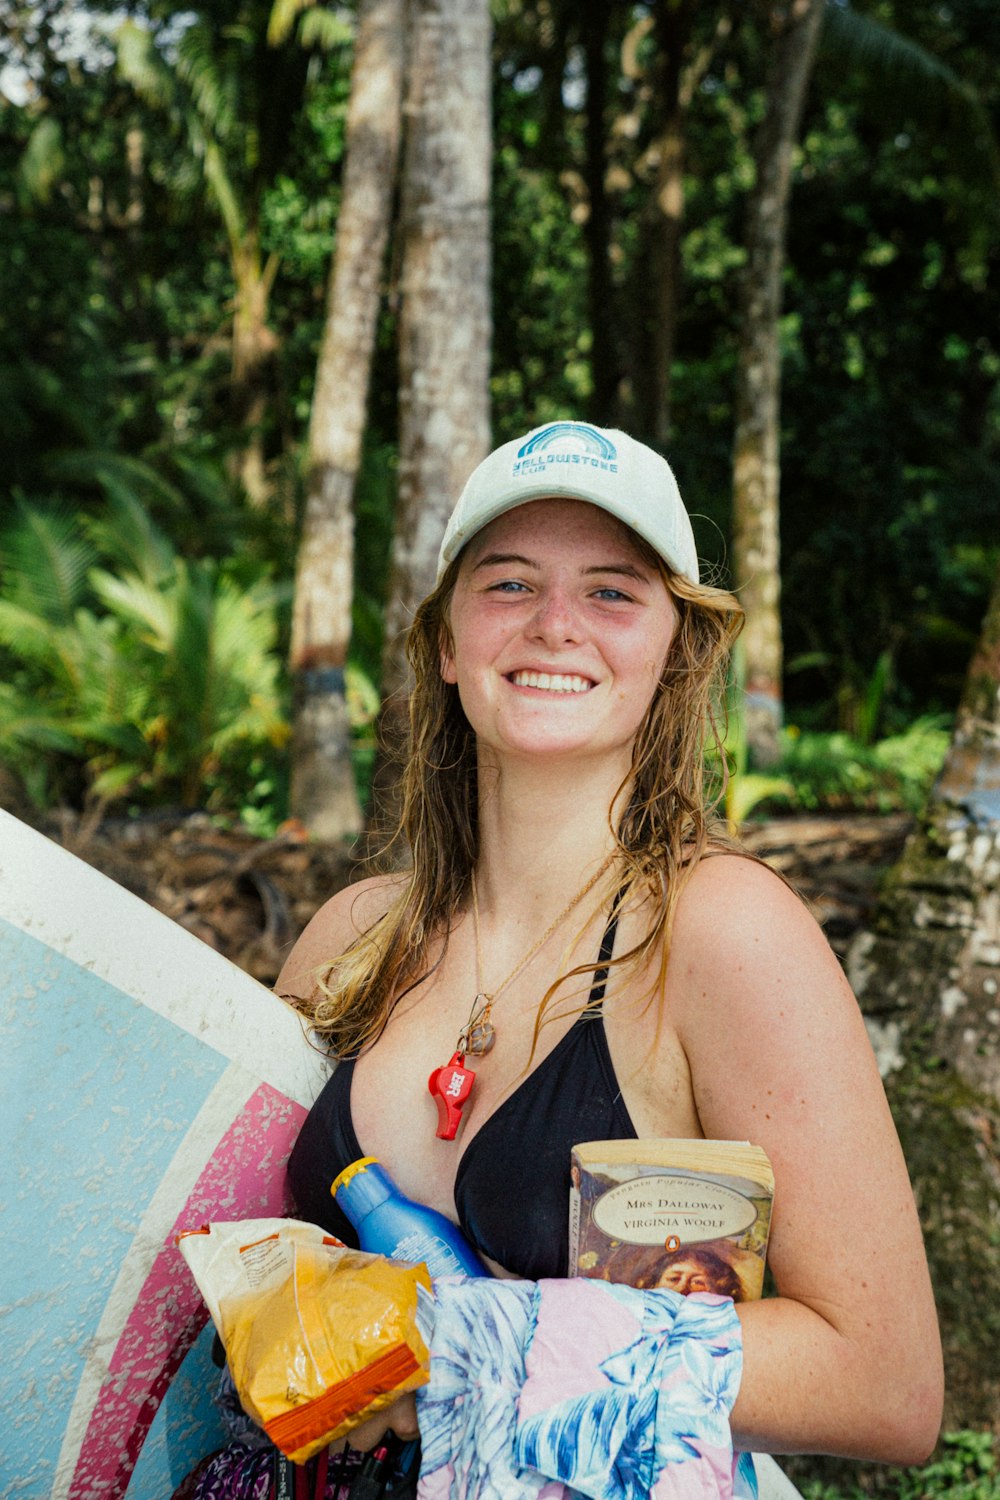 a woman holding a surfboard and a cup of coffee